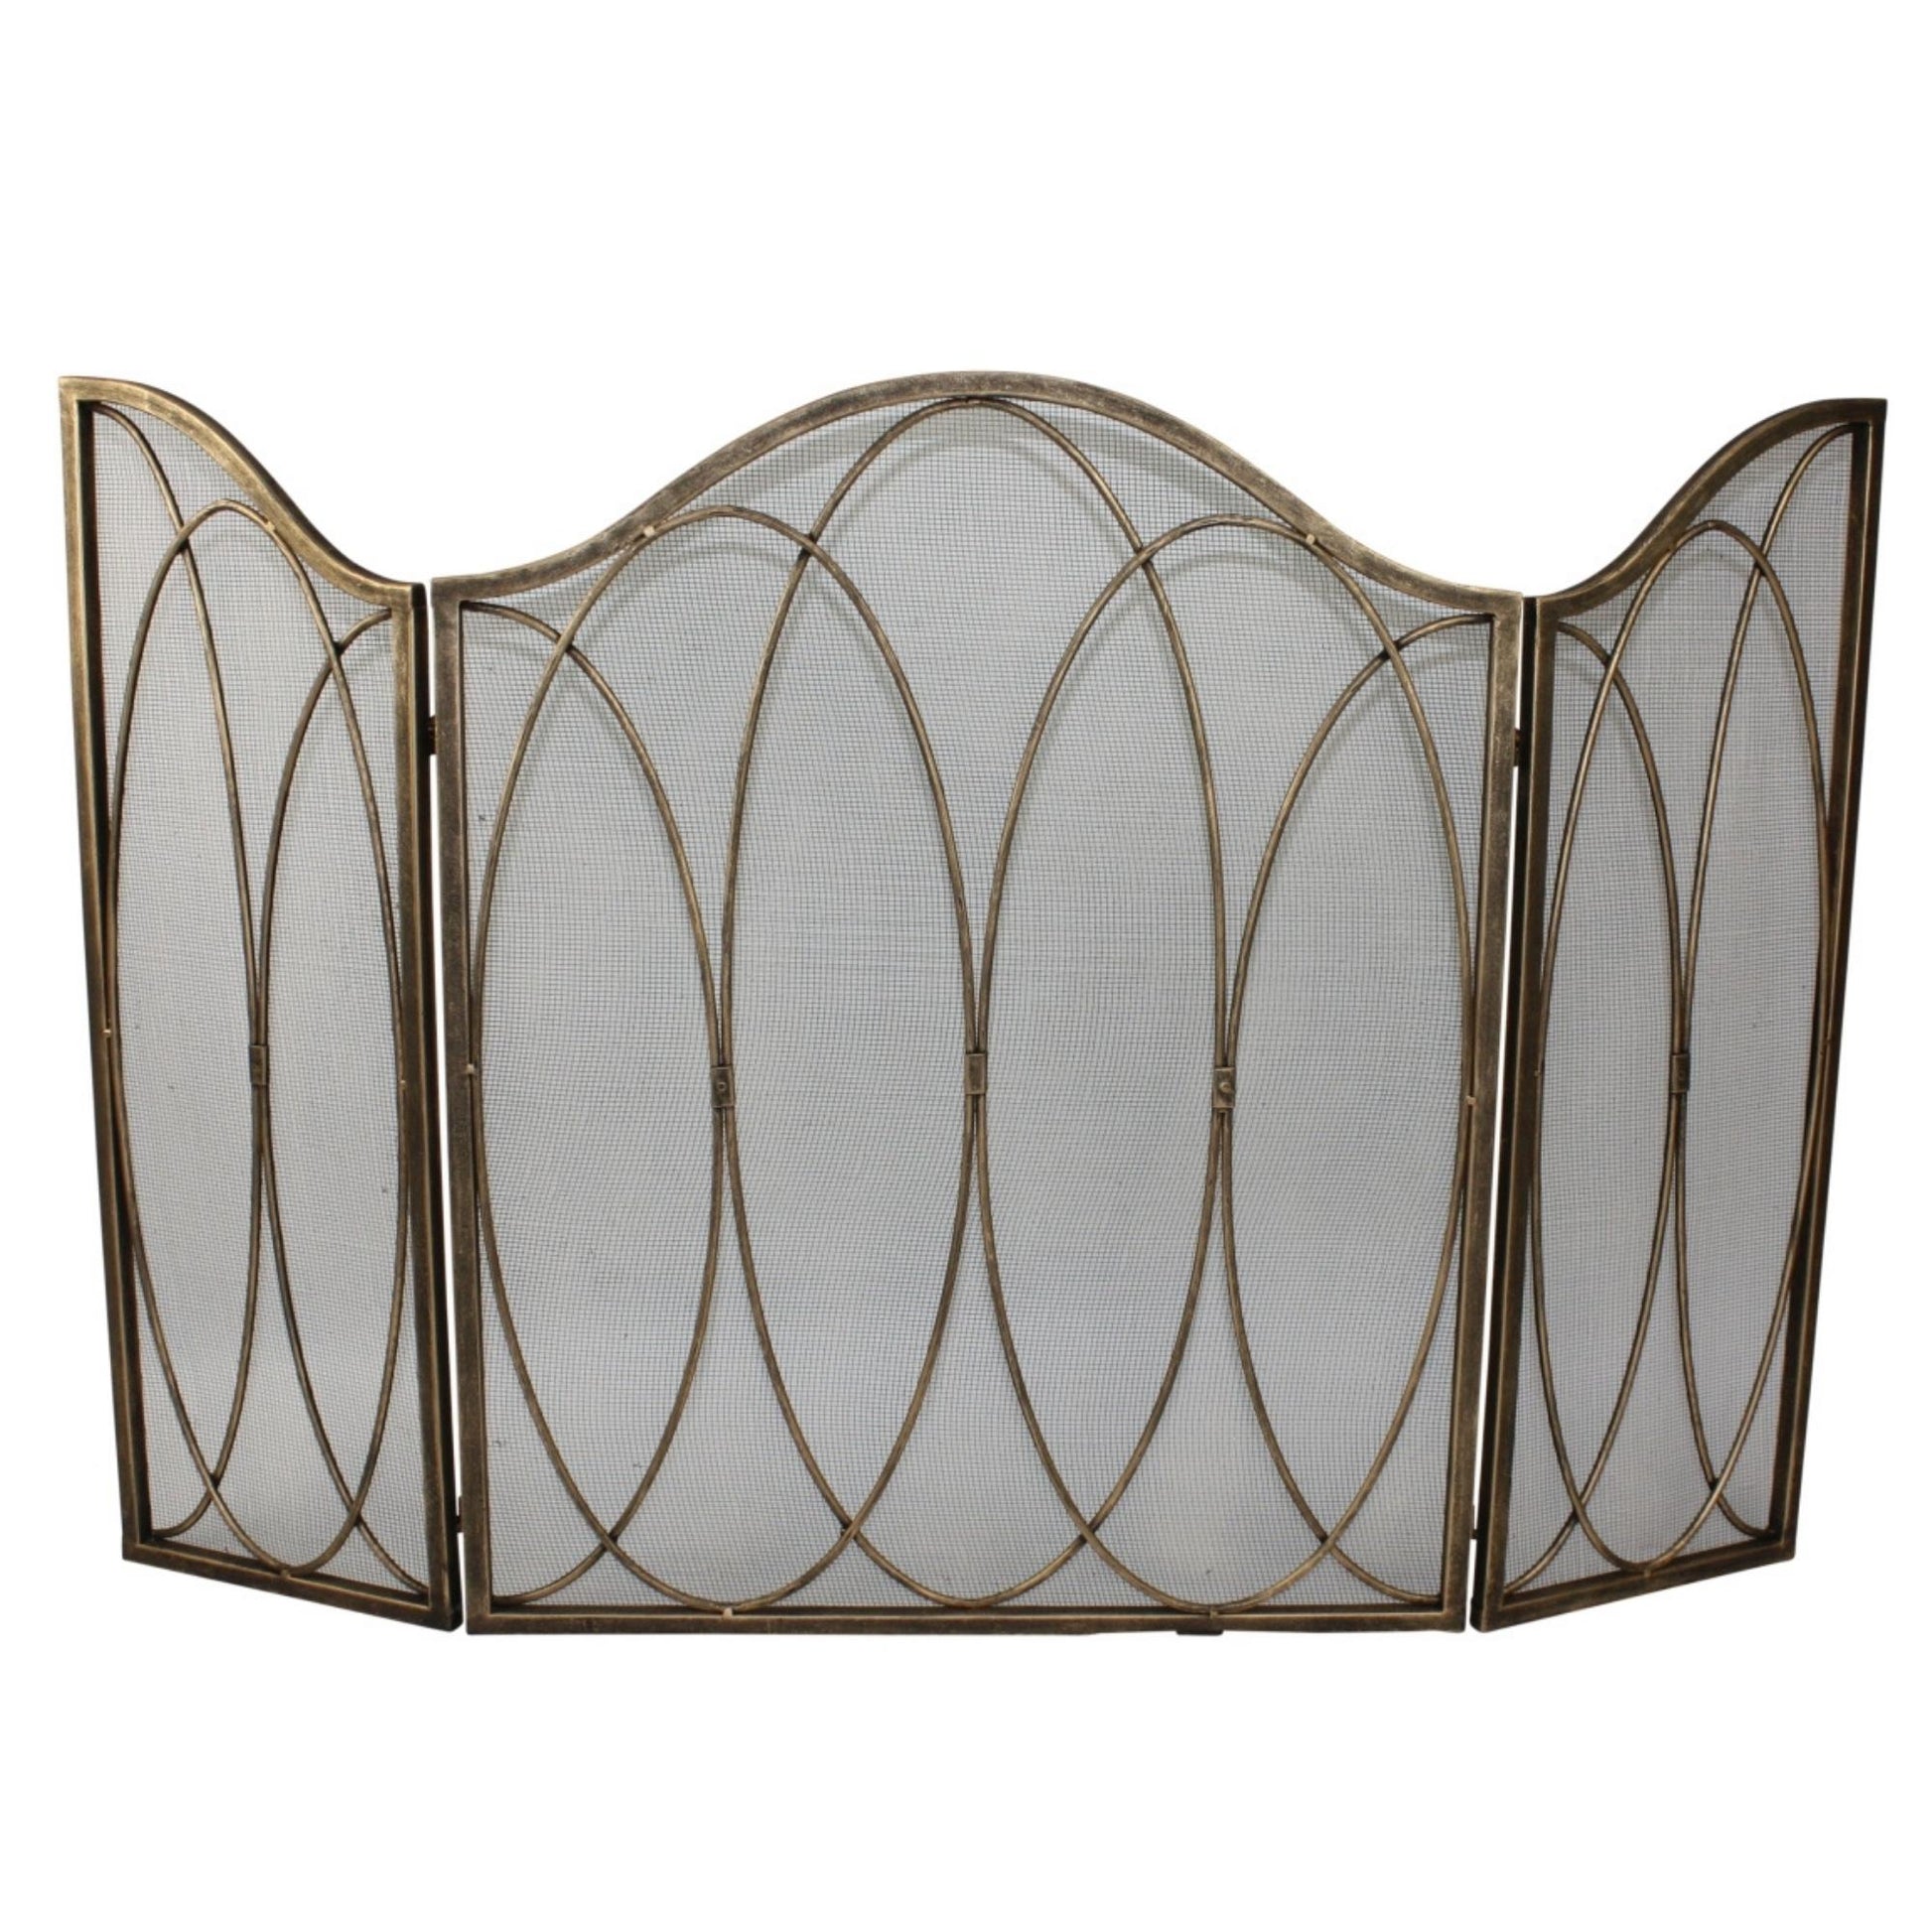 Light Burnished Gold Iron Fire Screen Oval Design and Mesh Backing - Three Panel Fireplace Screen | InsideOutCatalog.com